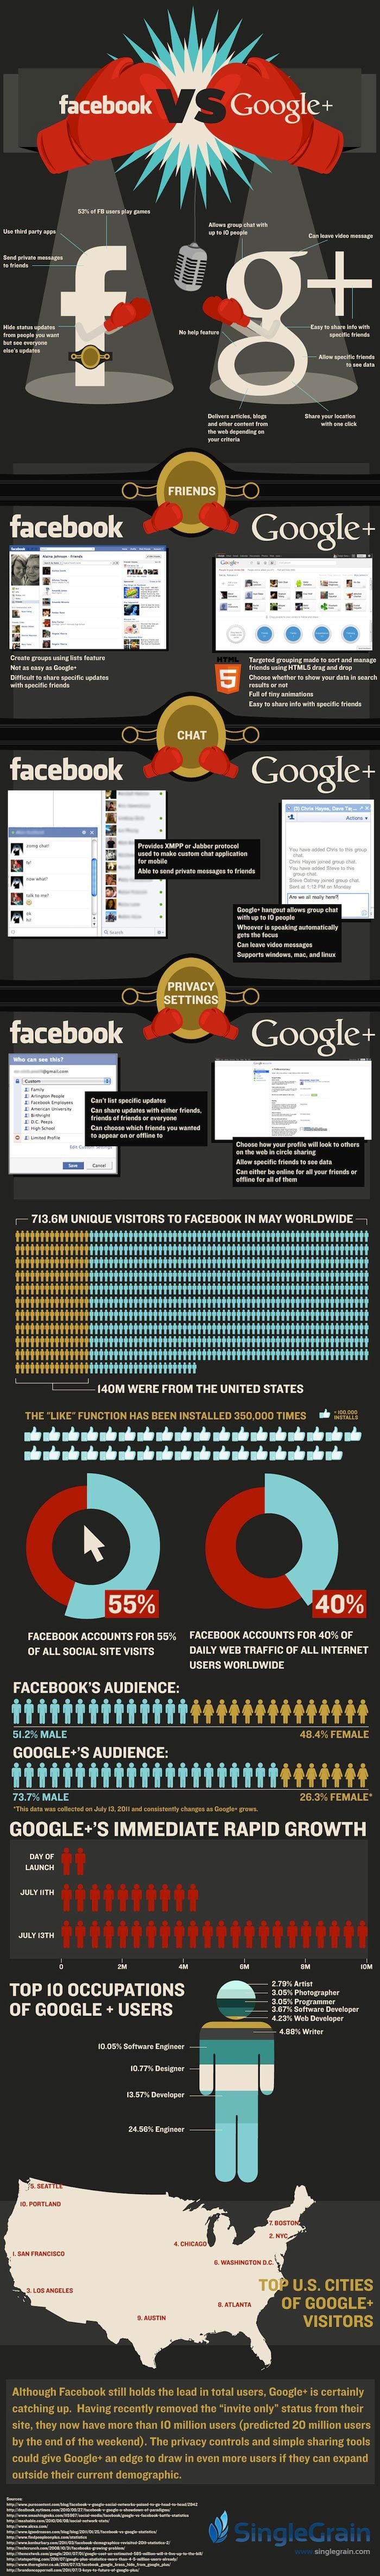 Facebook Compared to Google+ Infographic